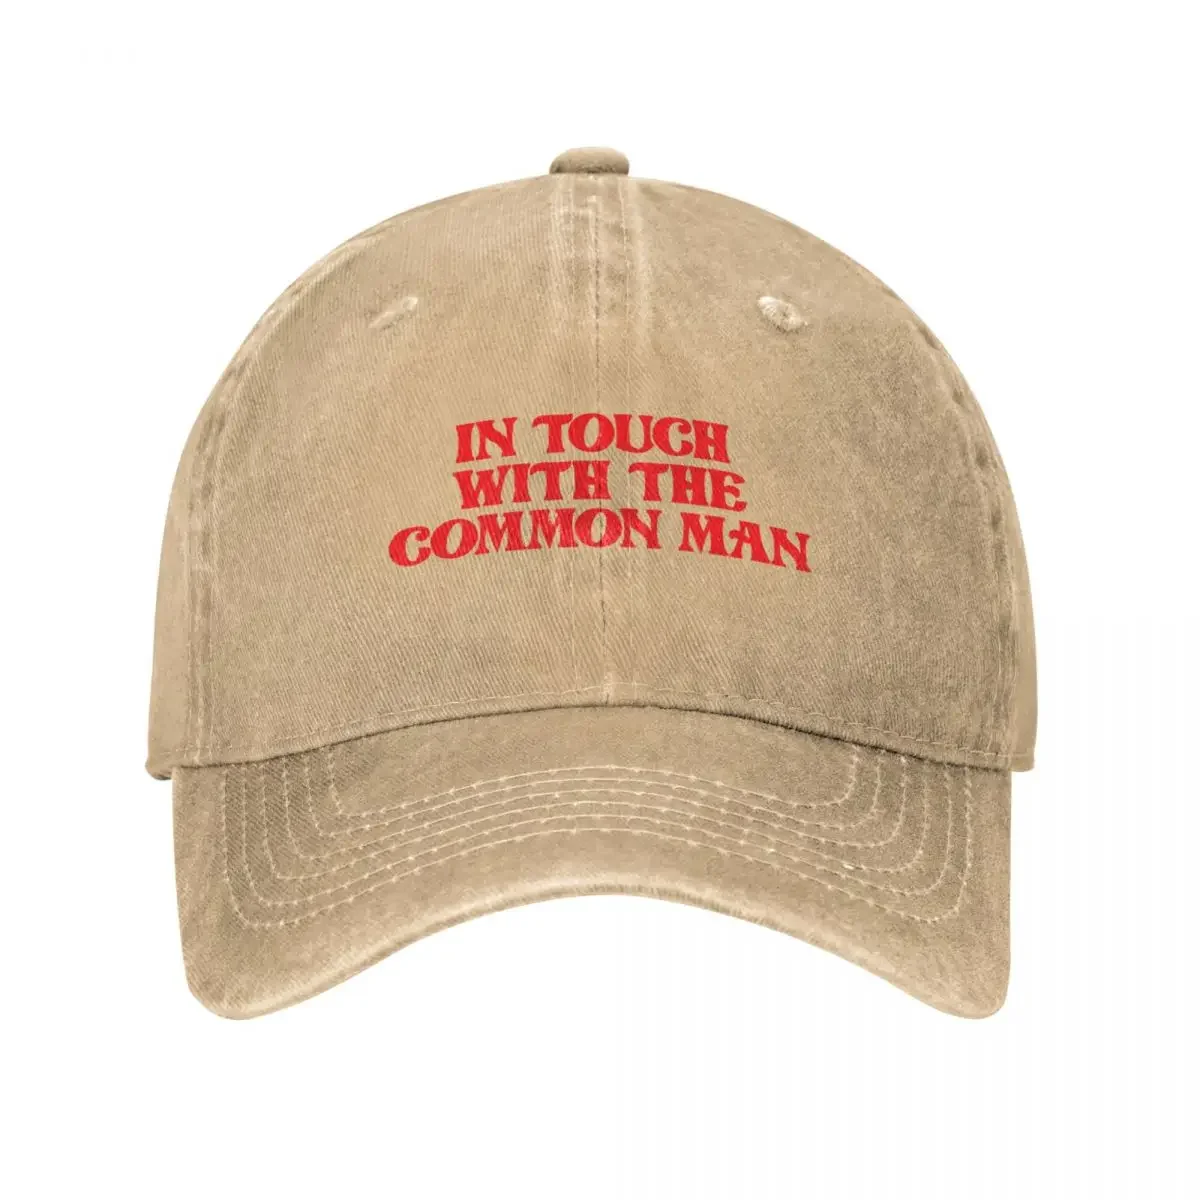 

2023 New In Touch With The Common Man Cap Cowboy Hat Visor Ny Cap Hat Women Men's